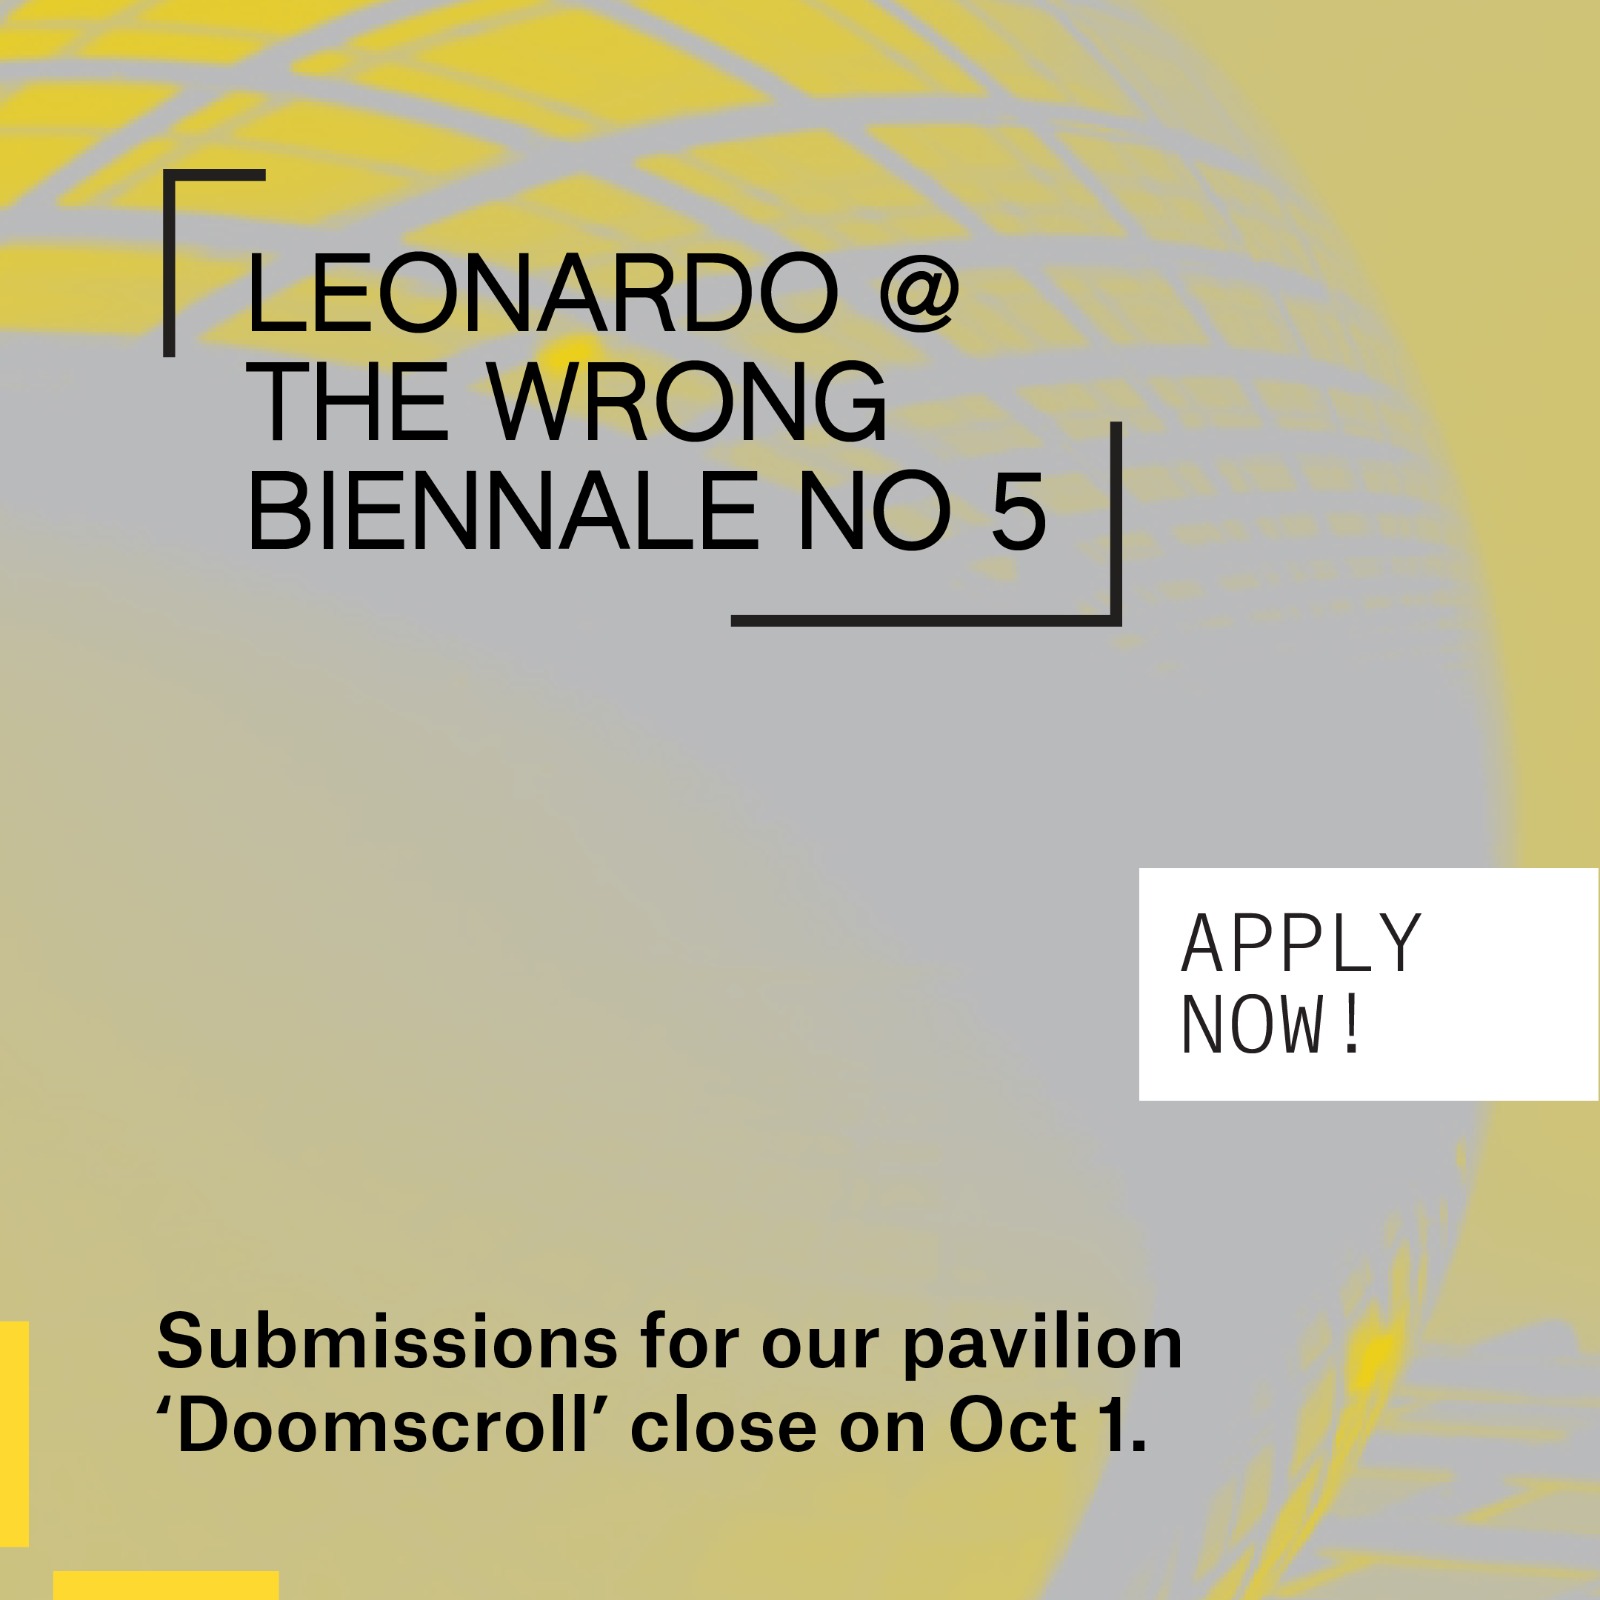 Leonardo at the Wrong Biennial No 5 Apply Now Submissions for our Pavillion Doomscoll close Oct 1